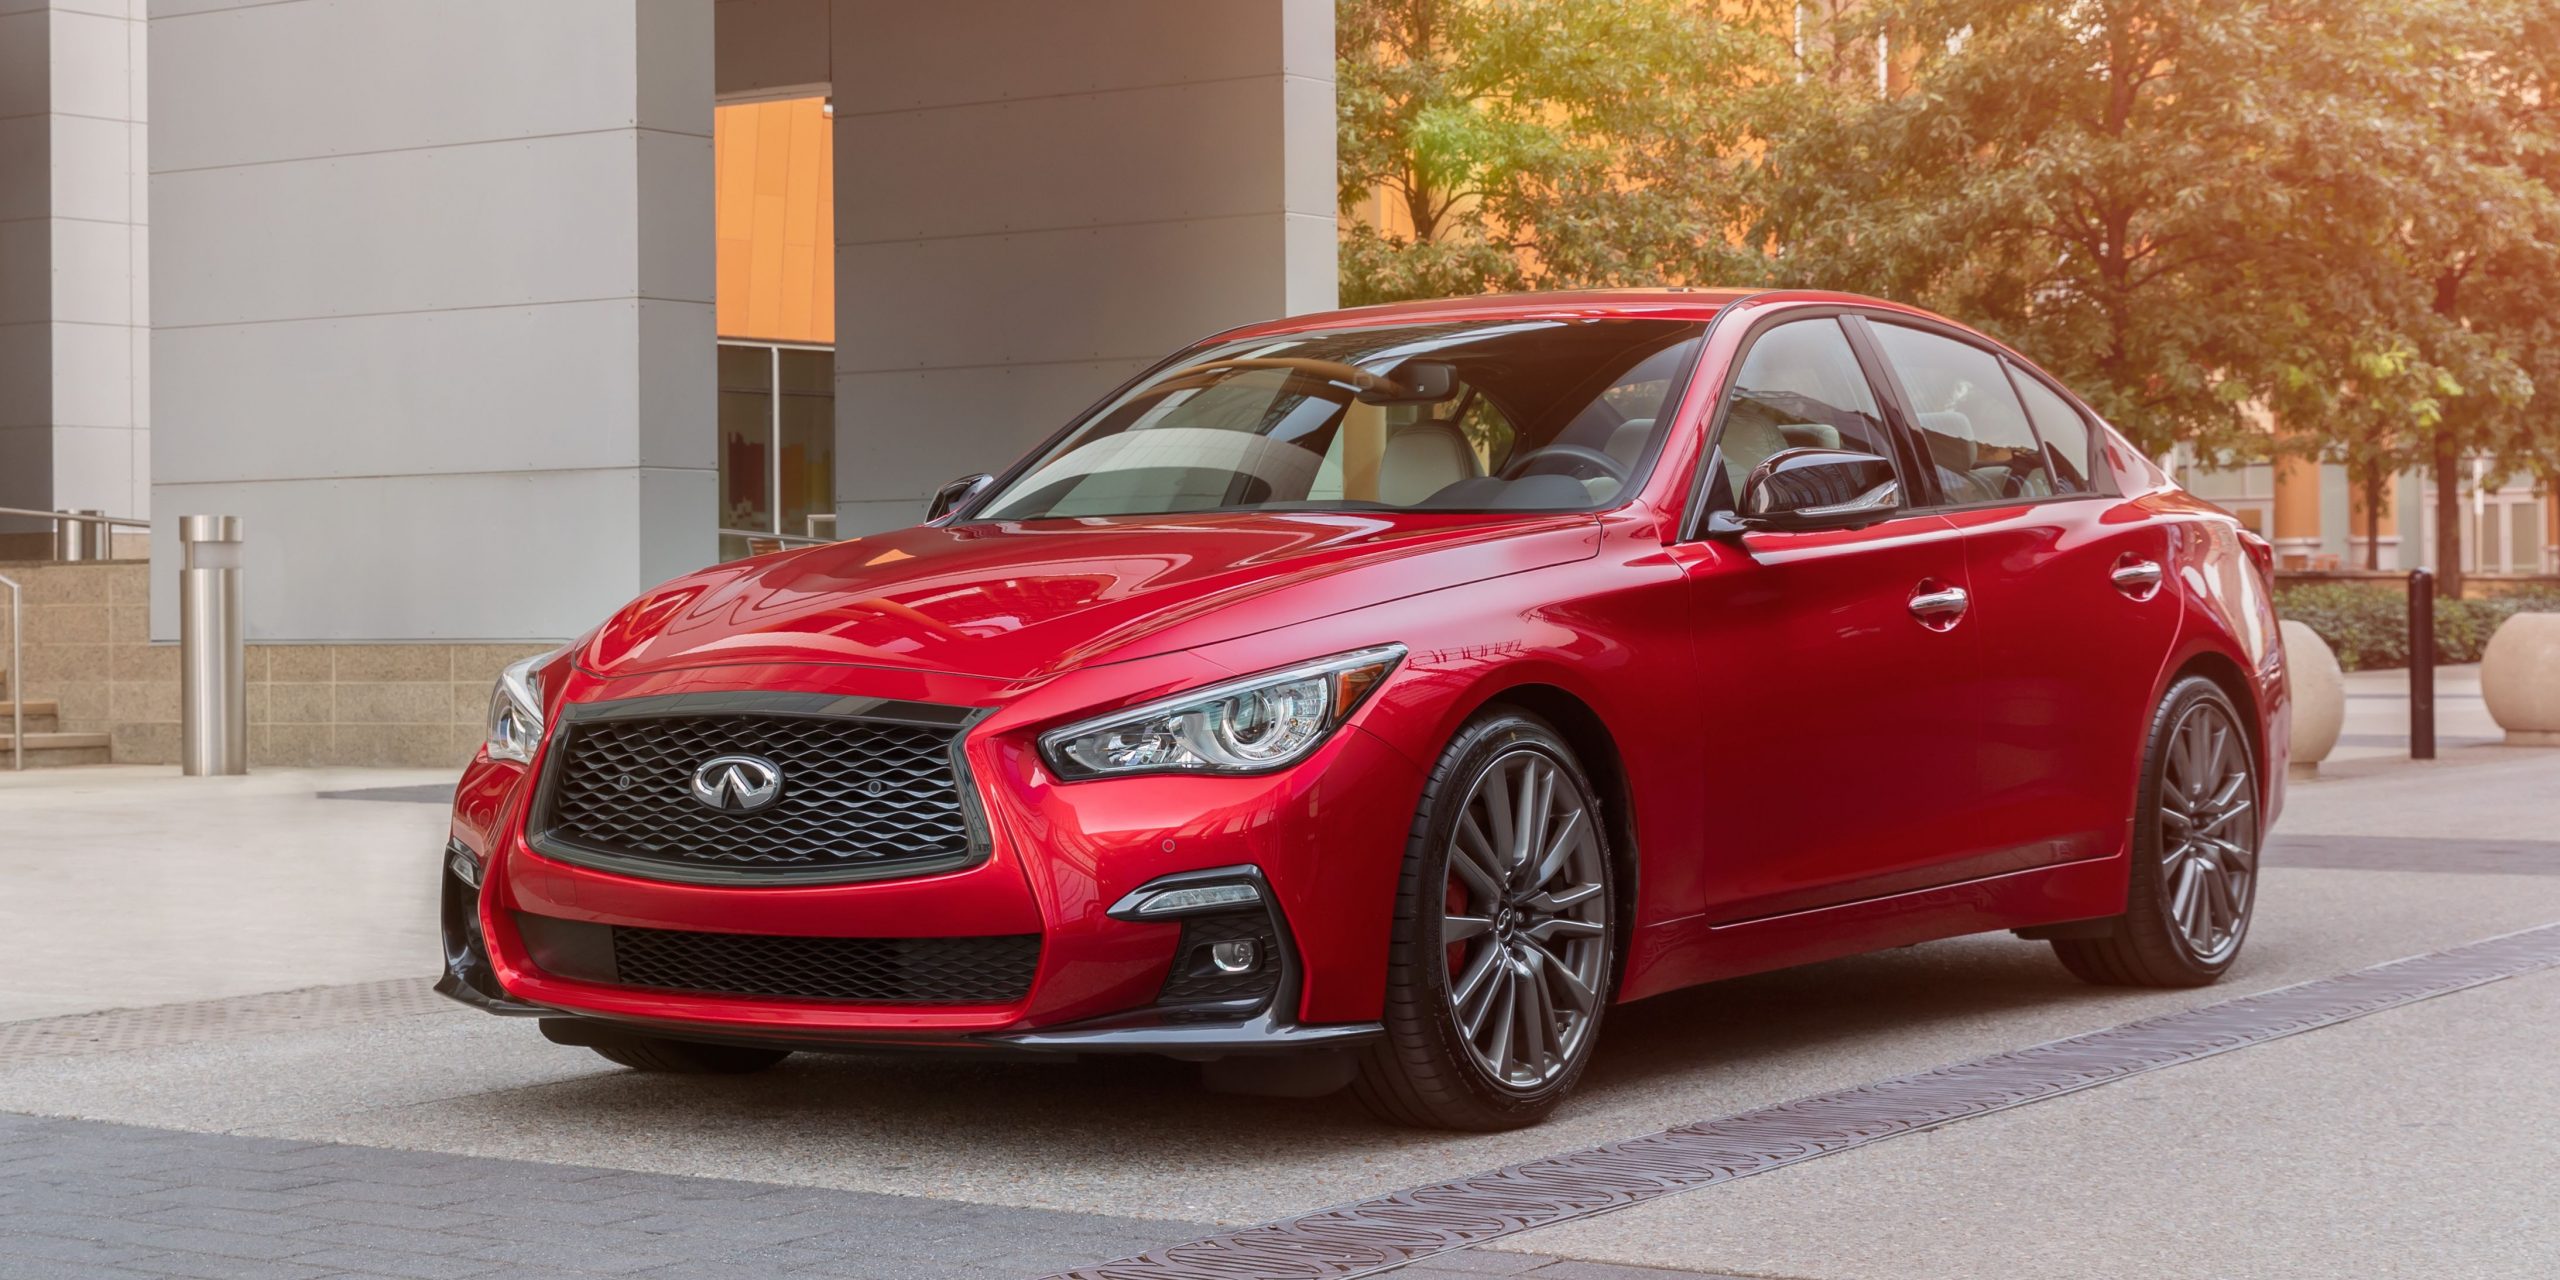 2021 Infiniti Q50 Adds New Trim Level, Price Sees Small Increase